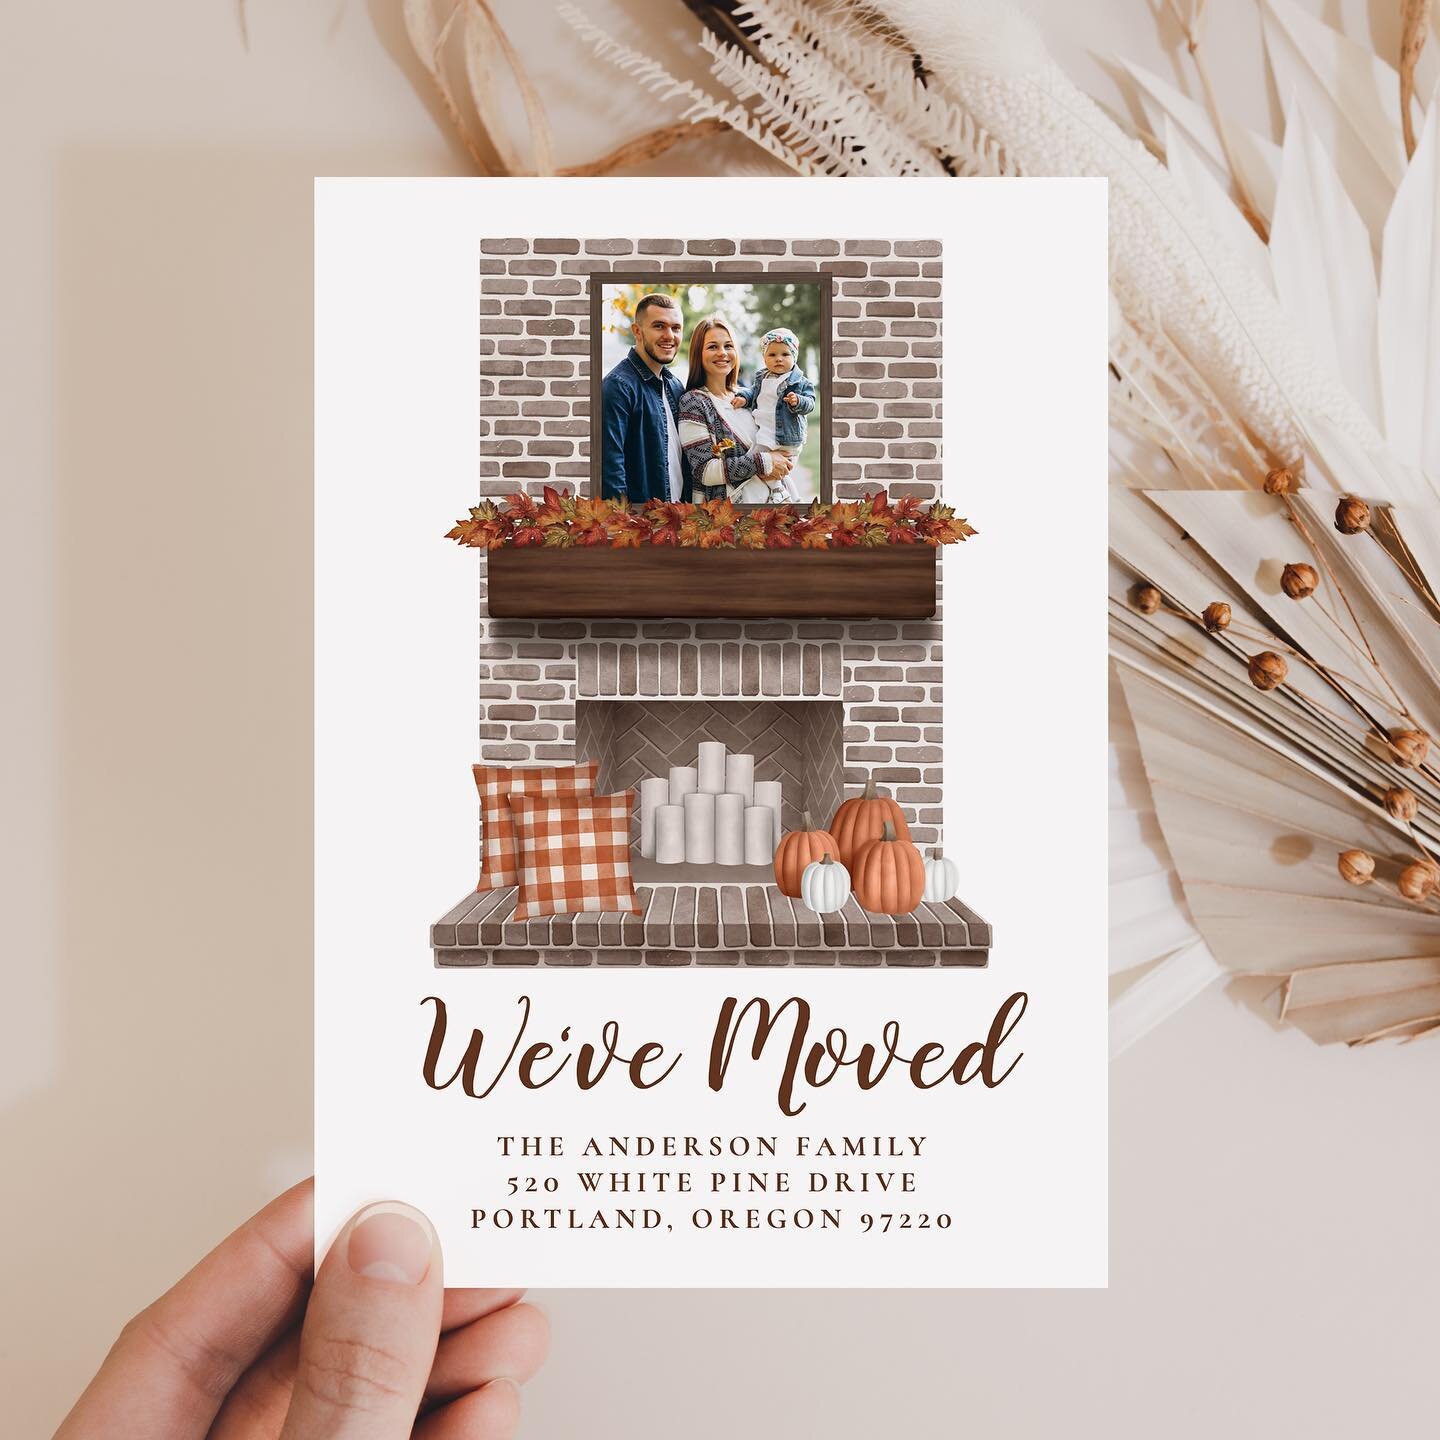 Introducing our new fall-themed moving announcements. Just add your favorite family photo and new address! The moving announcements are available for print, instant download, or choose both! Link in bio.